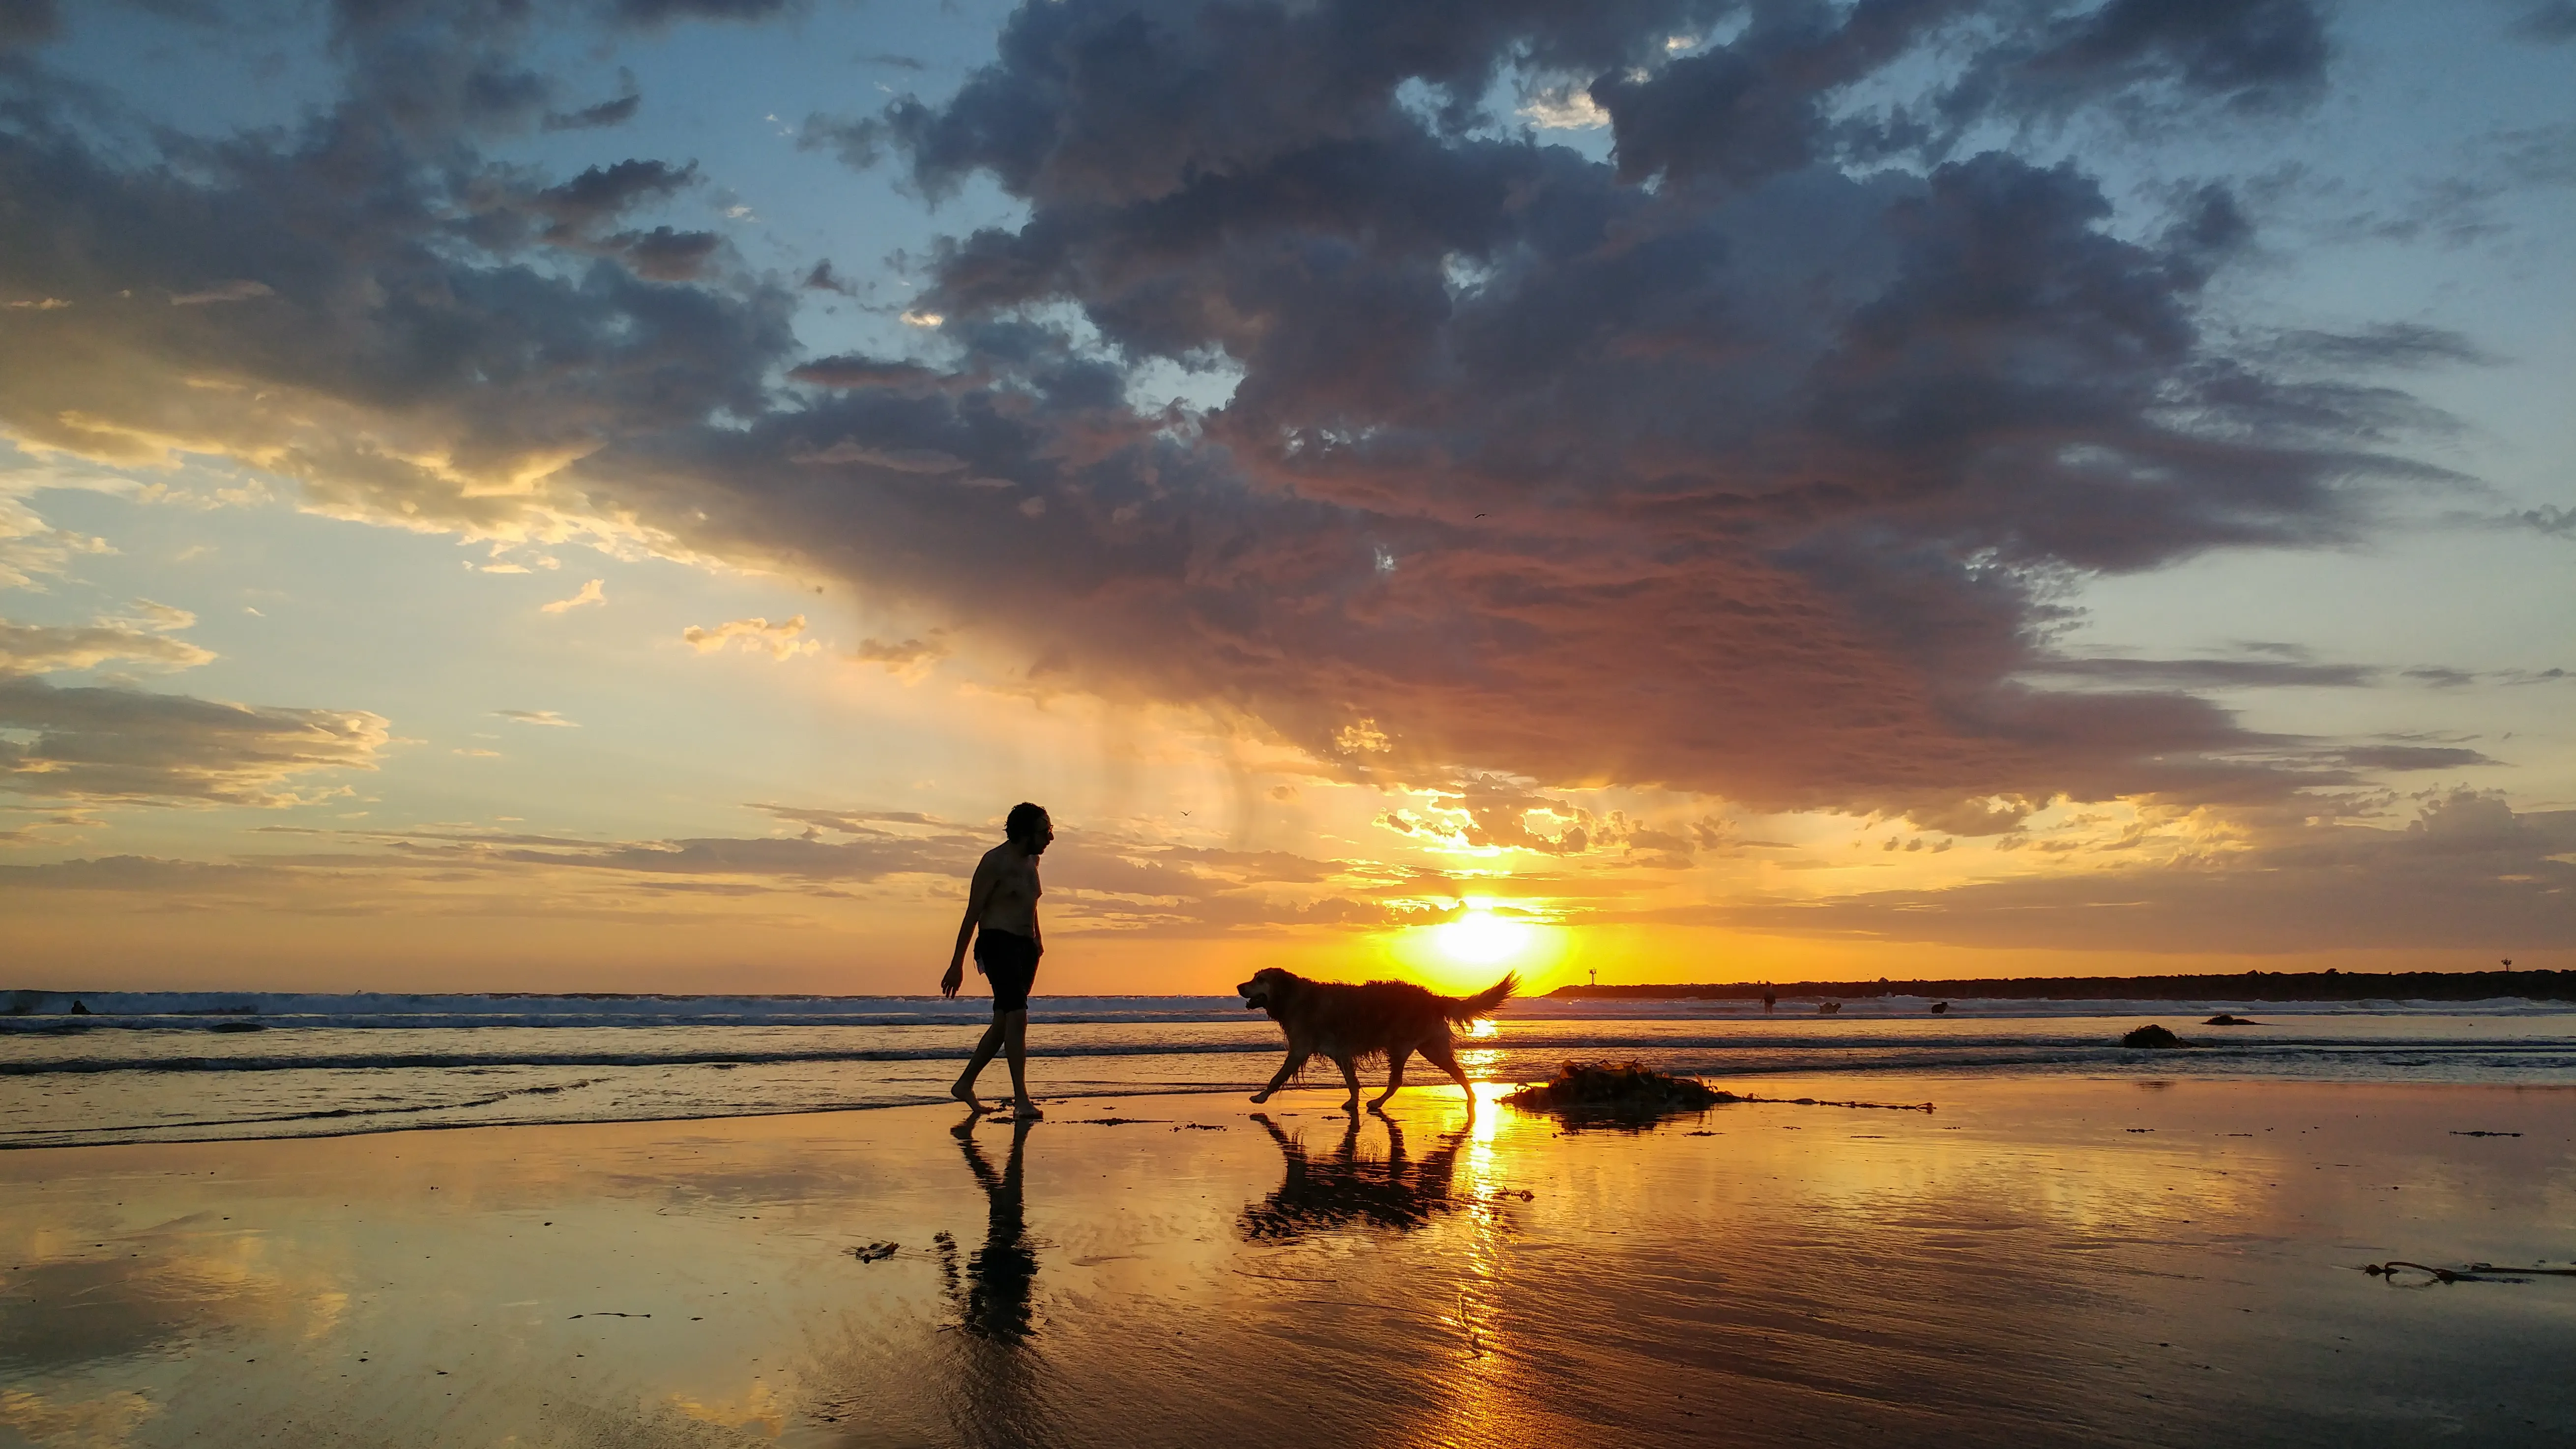 A Man and His Dog - Photo by Josh Utley